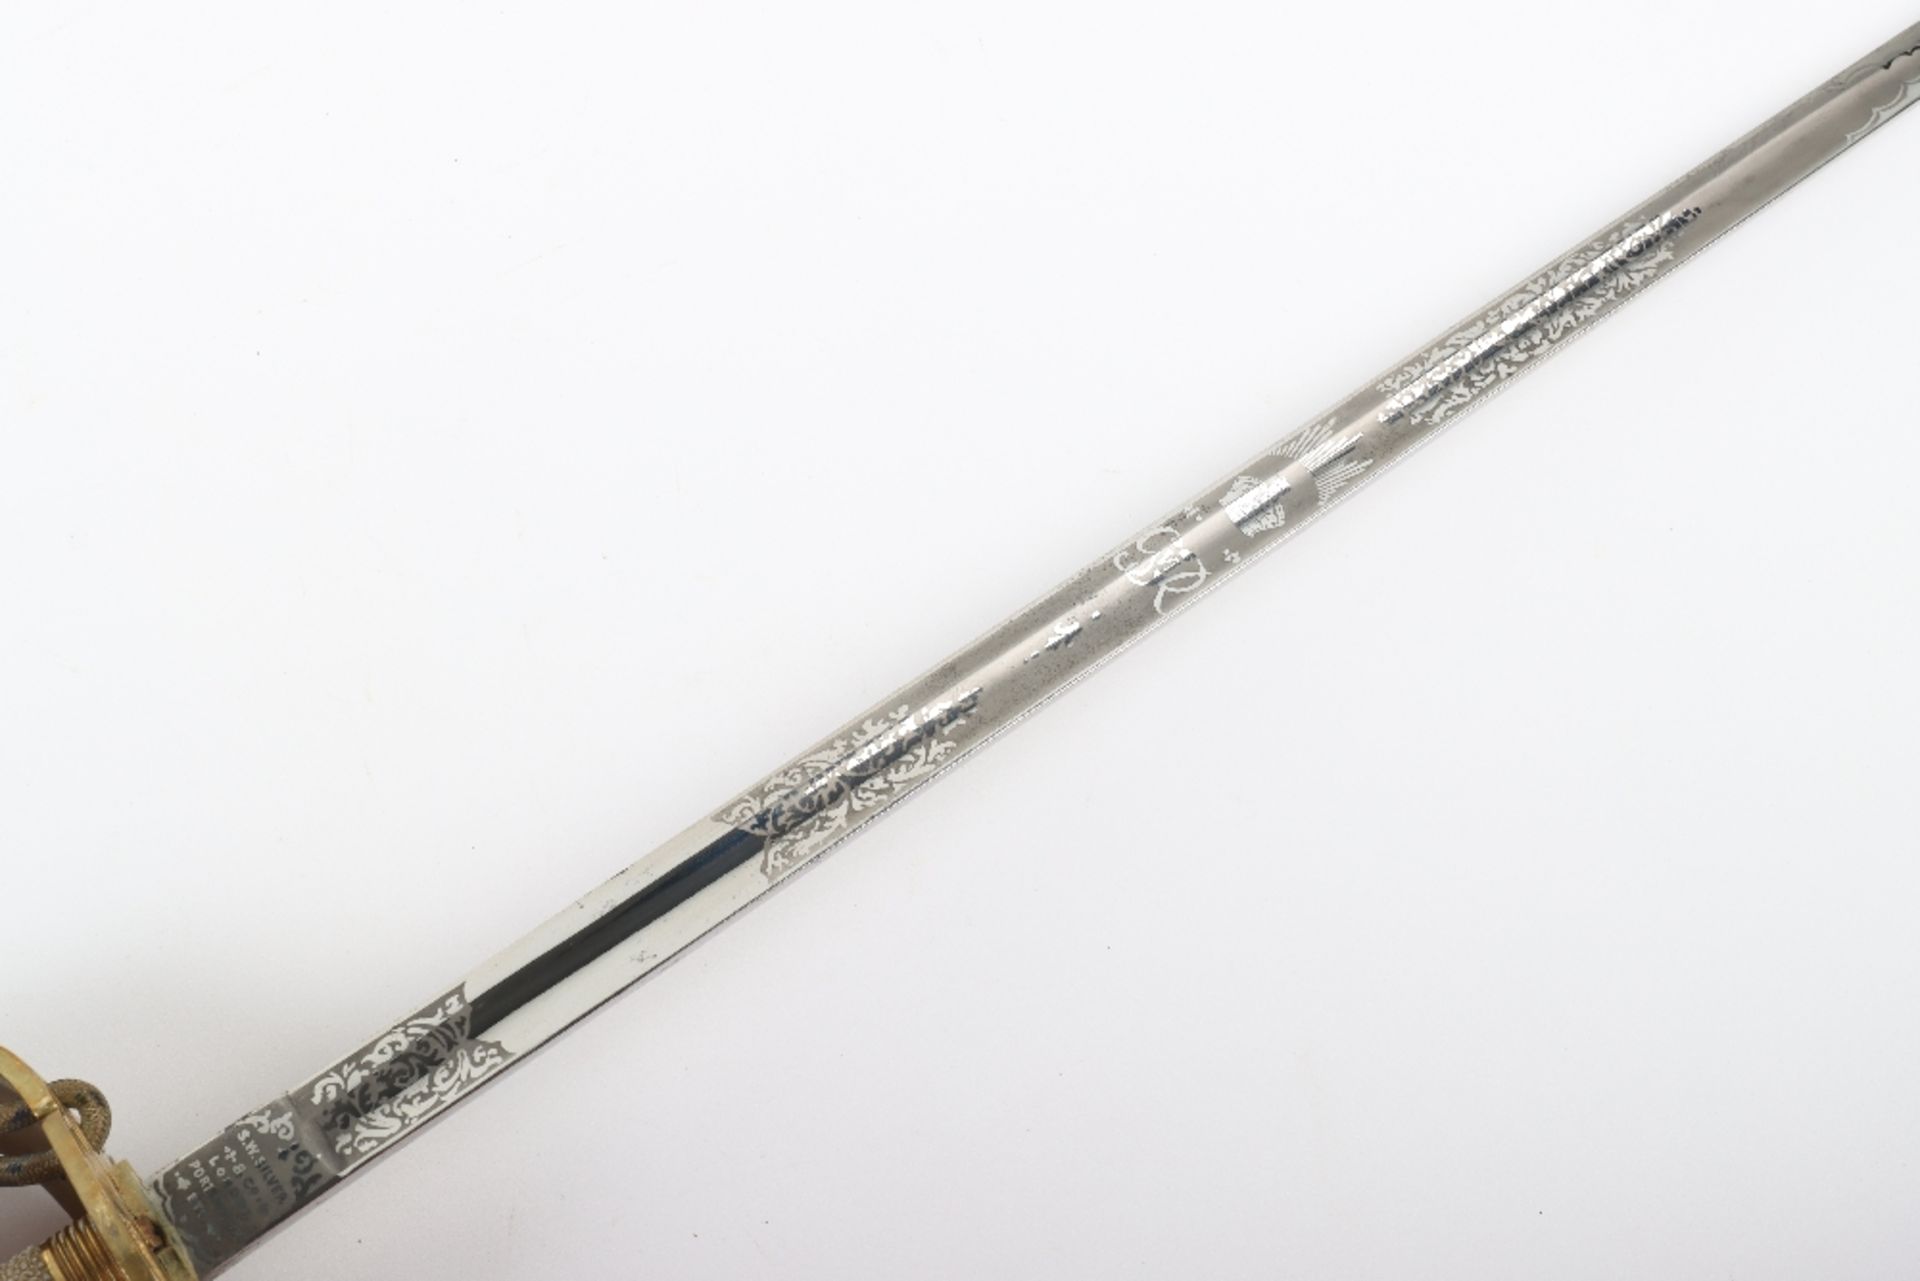 British George VI Naval Officers Sword by S W Silver and Co - Image 9 of 14